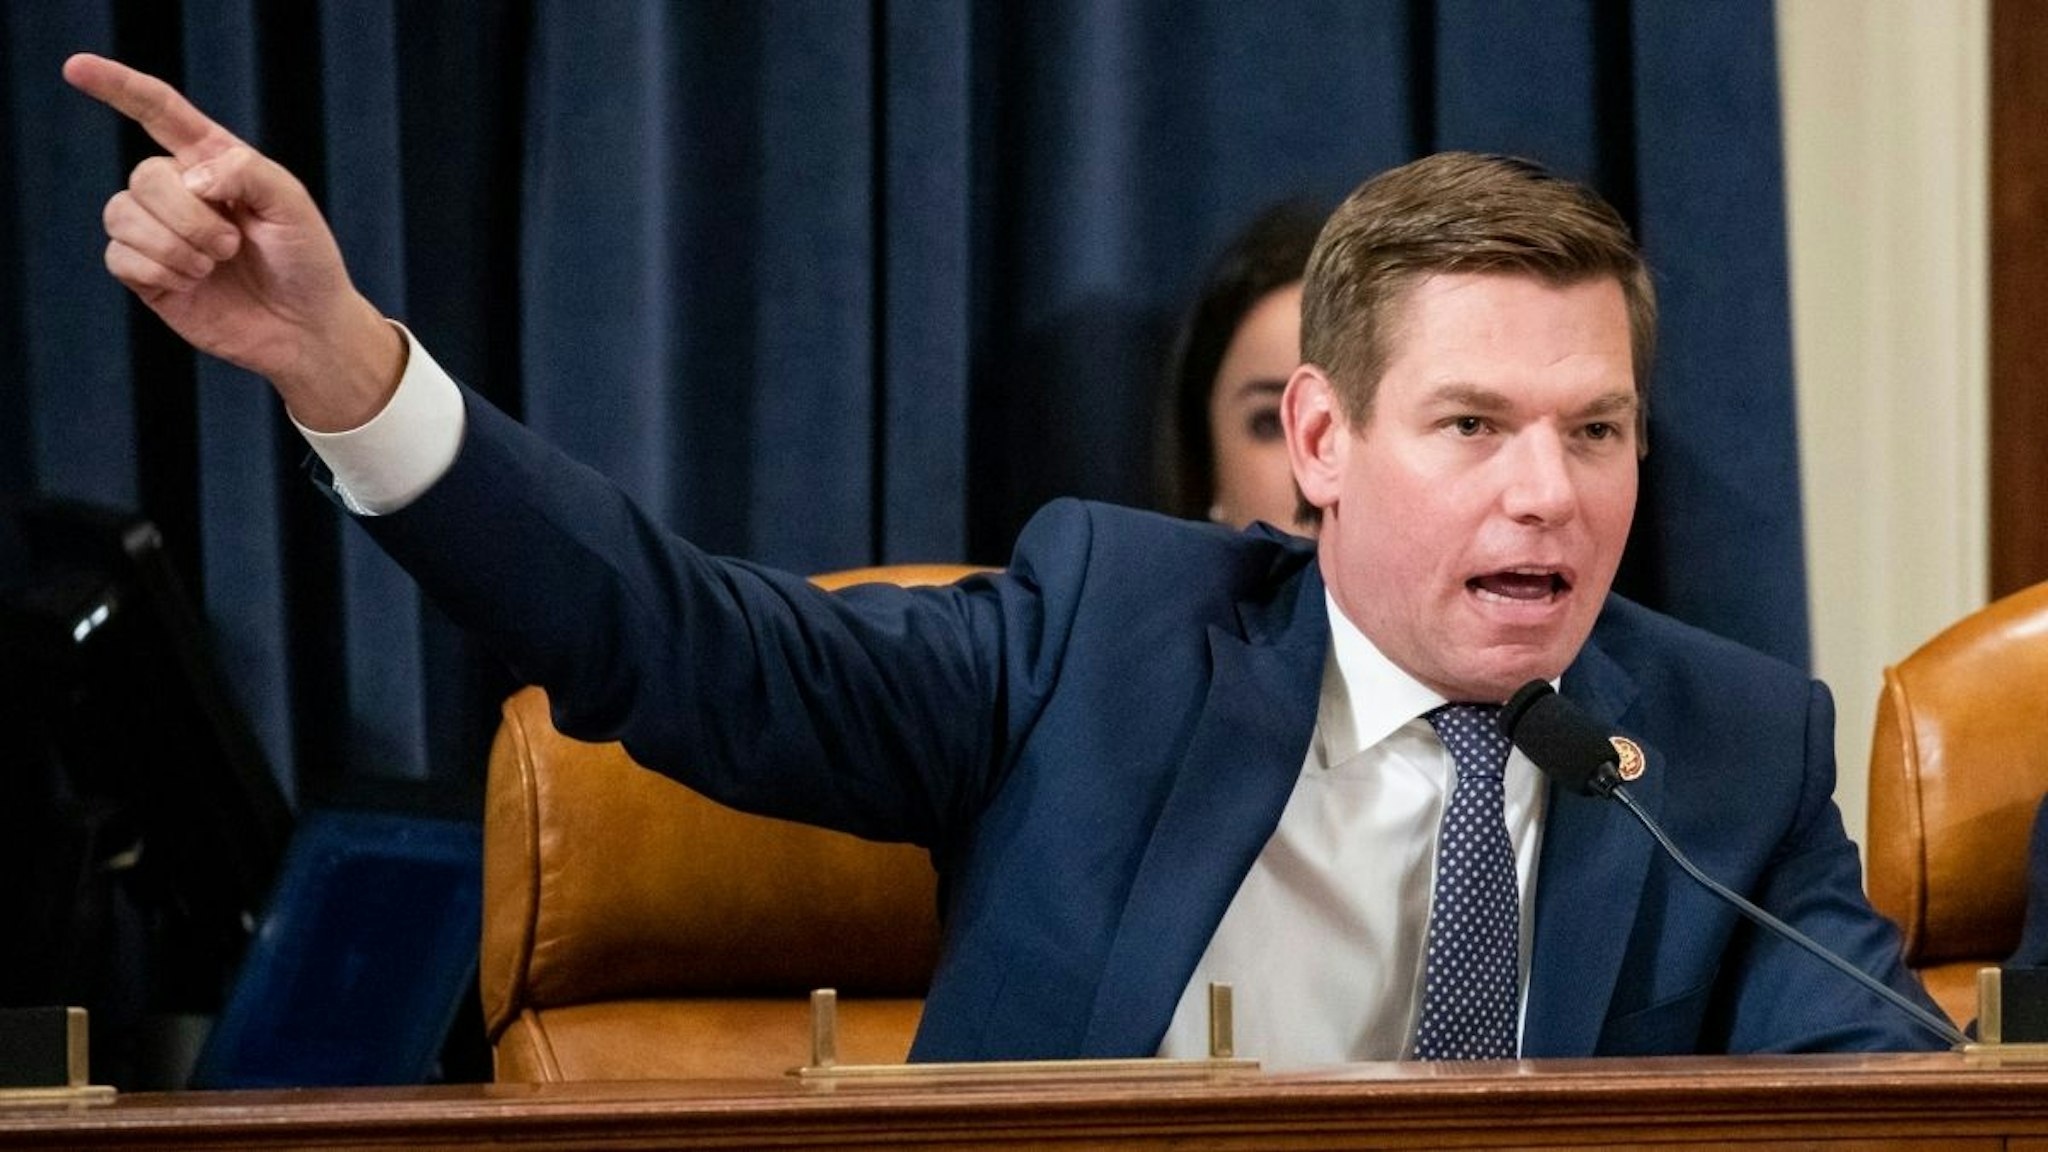 U.S. Rep. Eric Swalwell (D-CA) questions Gordon Sondland, the U.S ambassador to the European Union, during a hearing before the House Intelligence Committee in the Longworth House Office Building on Capitol Hill November 20, 2019 in Washington, DC.